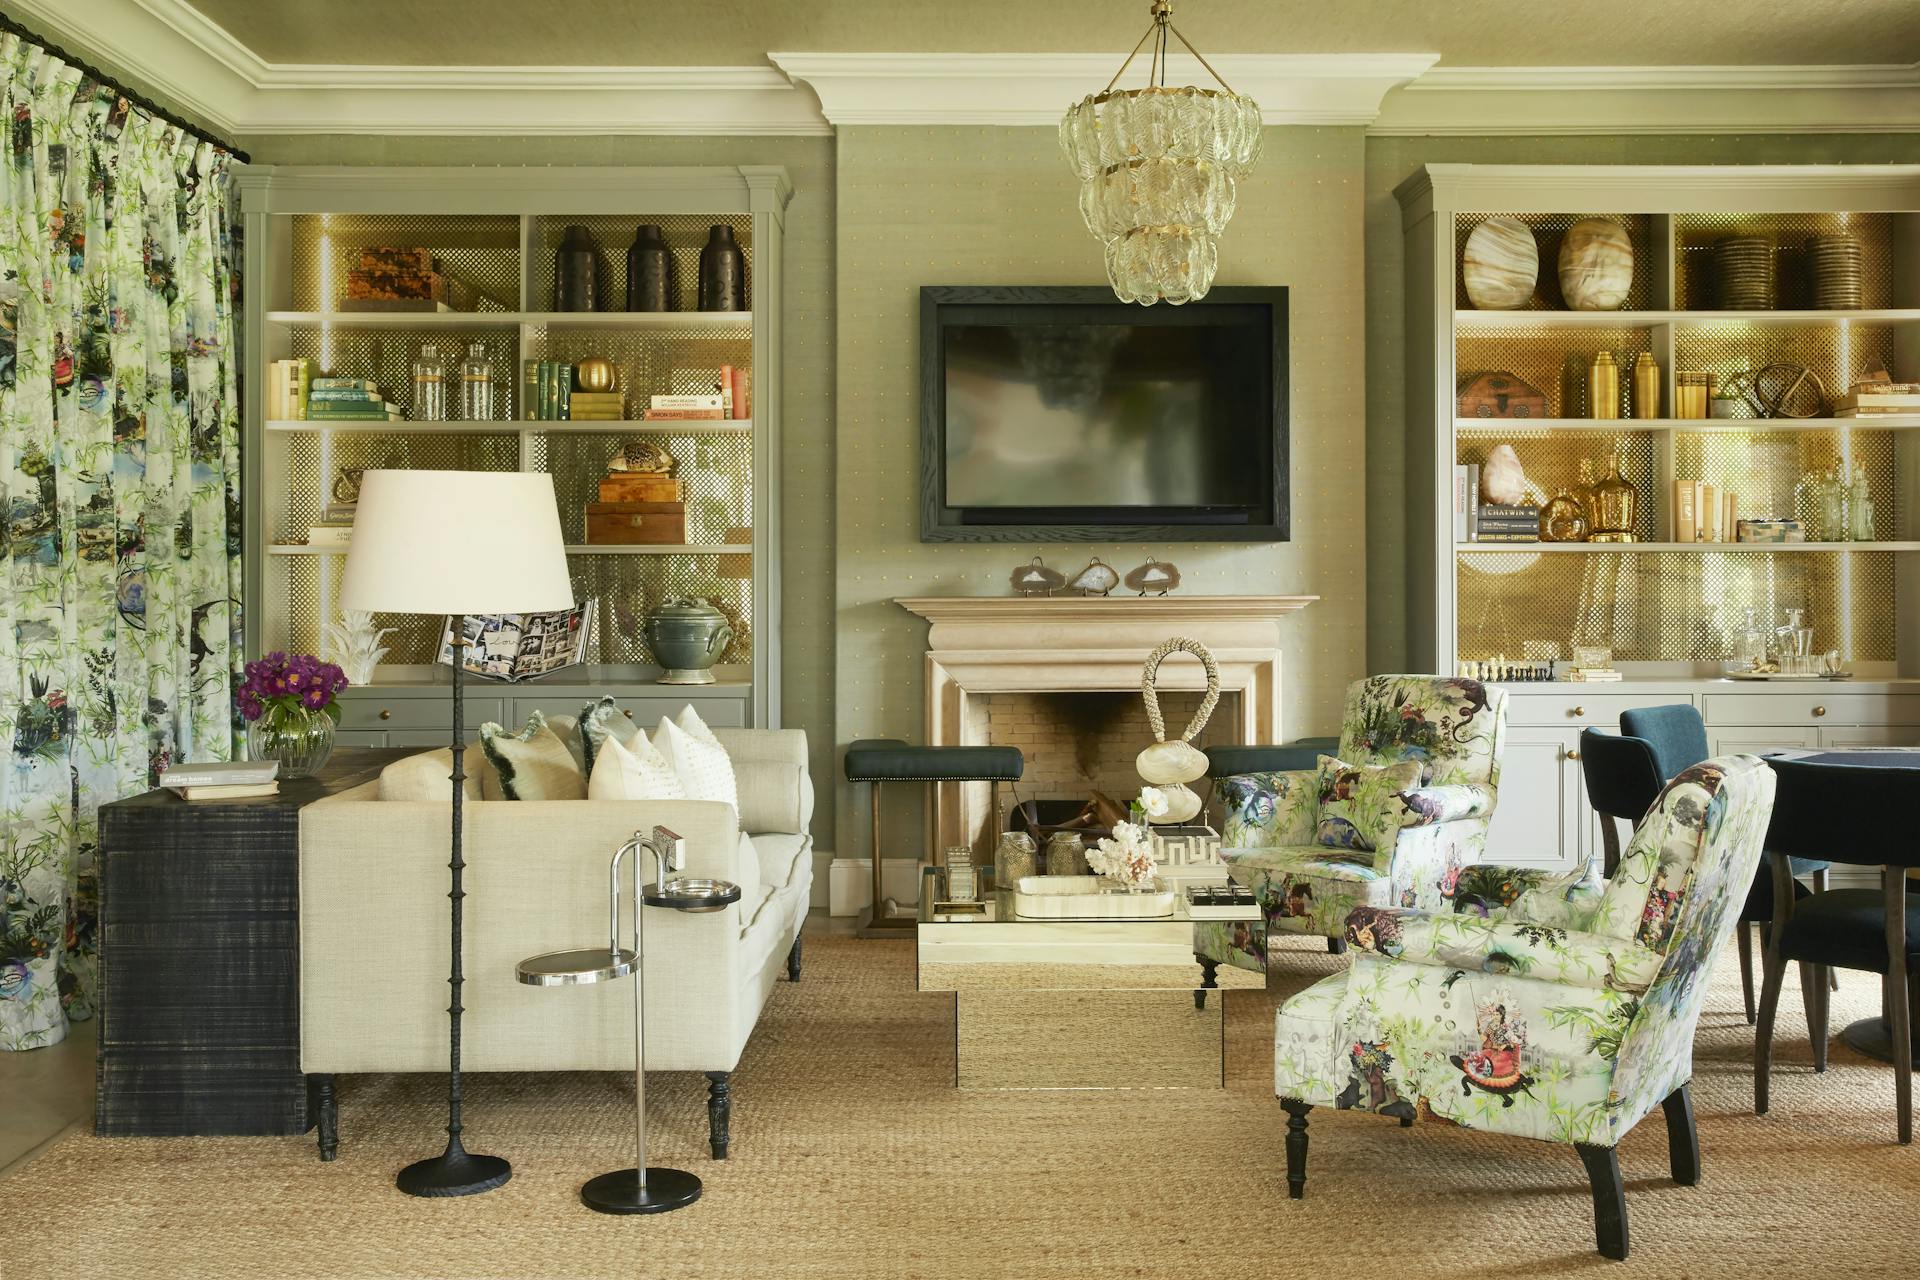 A sitting room features a square, mirrored coffee table, cream-coloured sofa, armchairs upholstered in ornate fabric, and two bookshelves and bookshelves holding vintage books alongside decorative items.